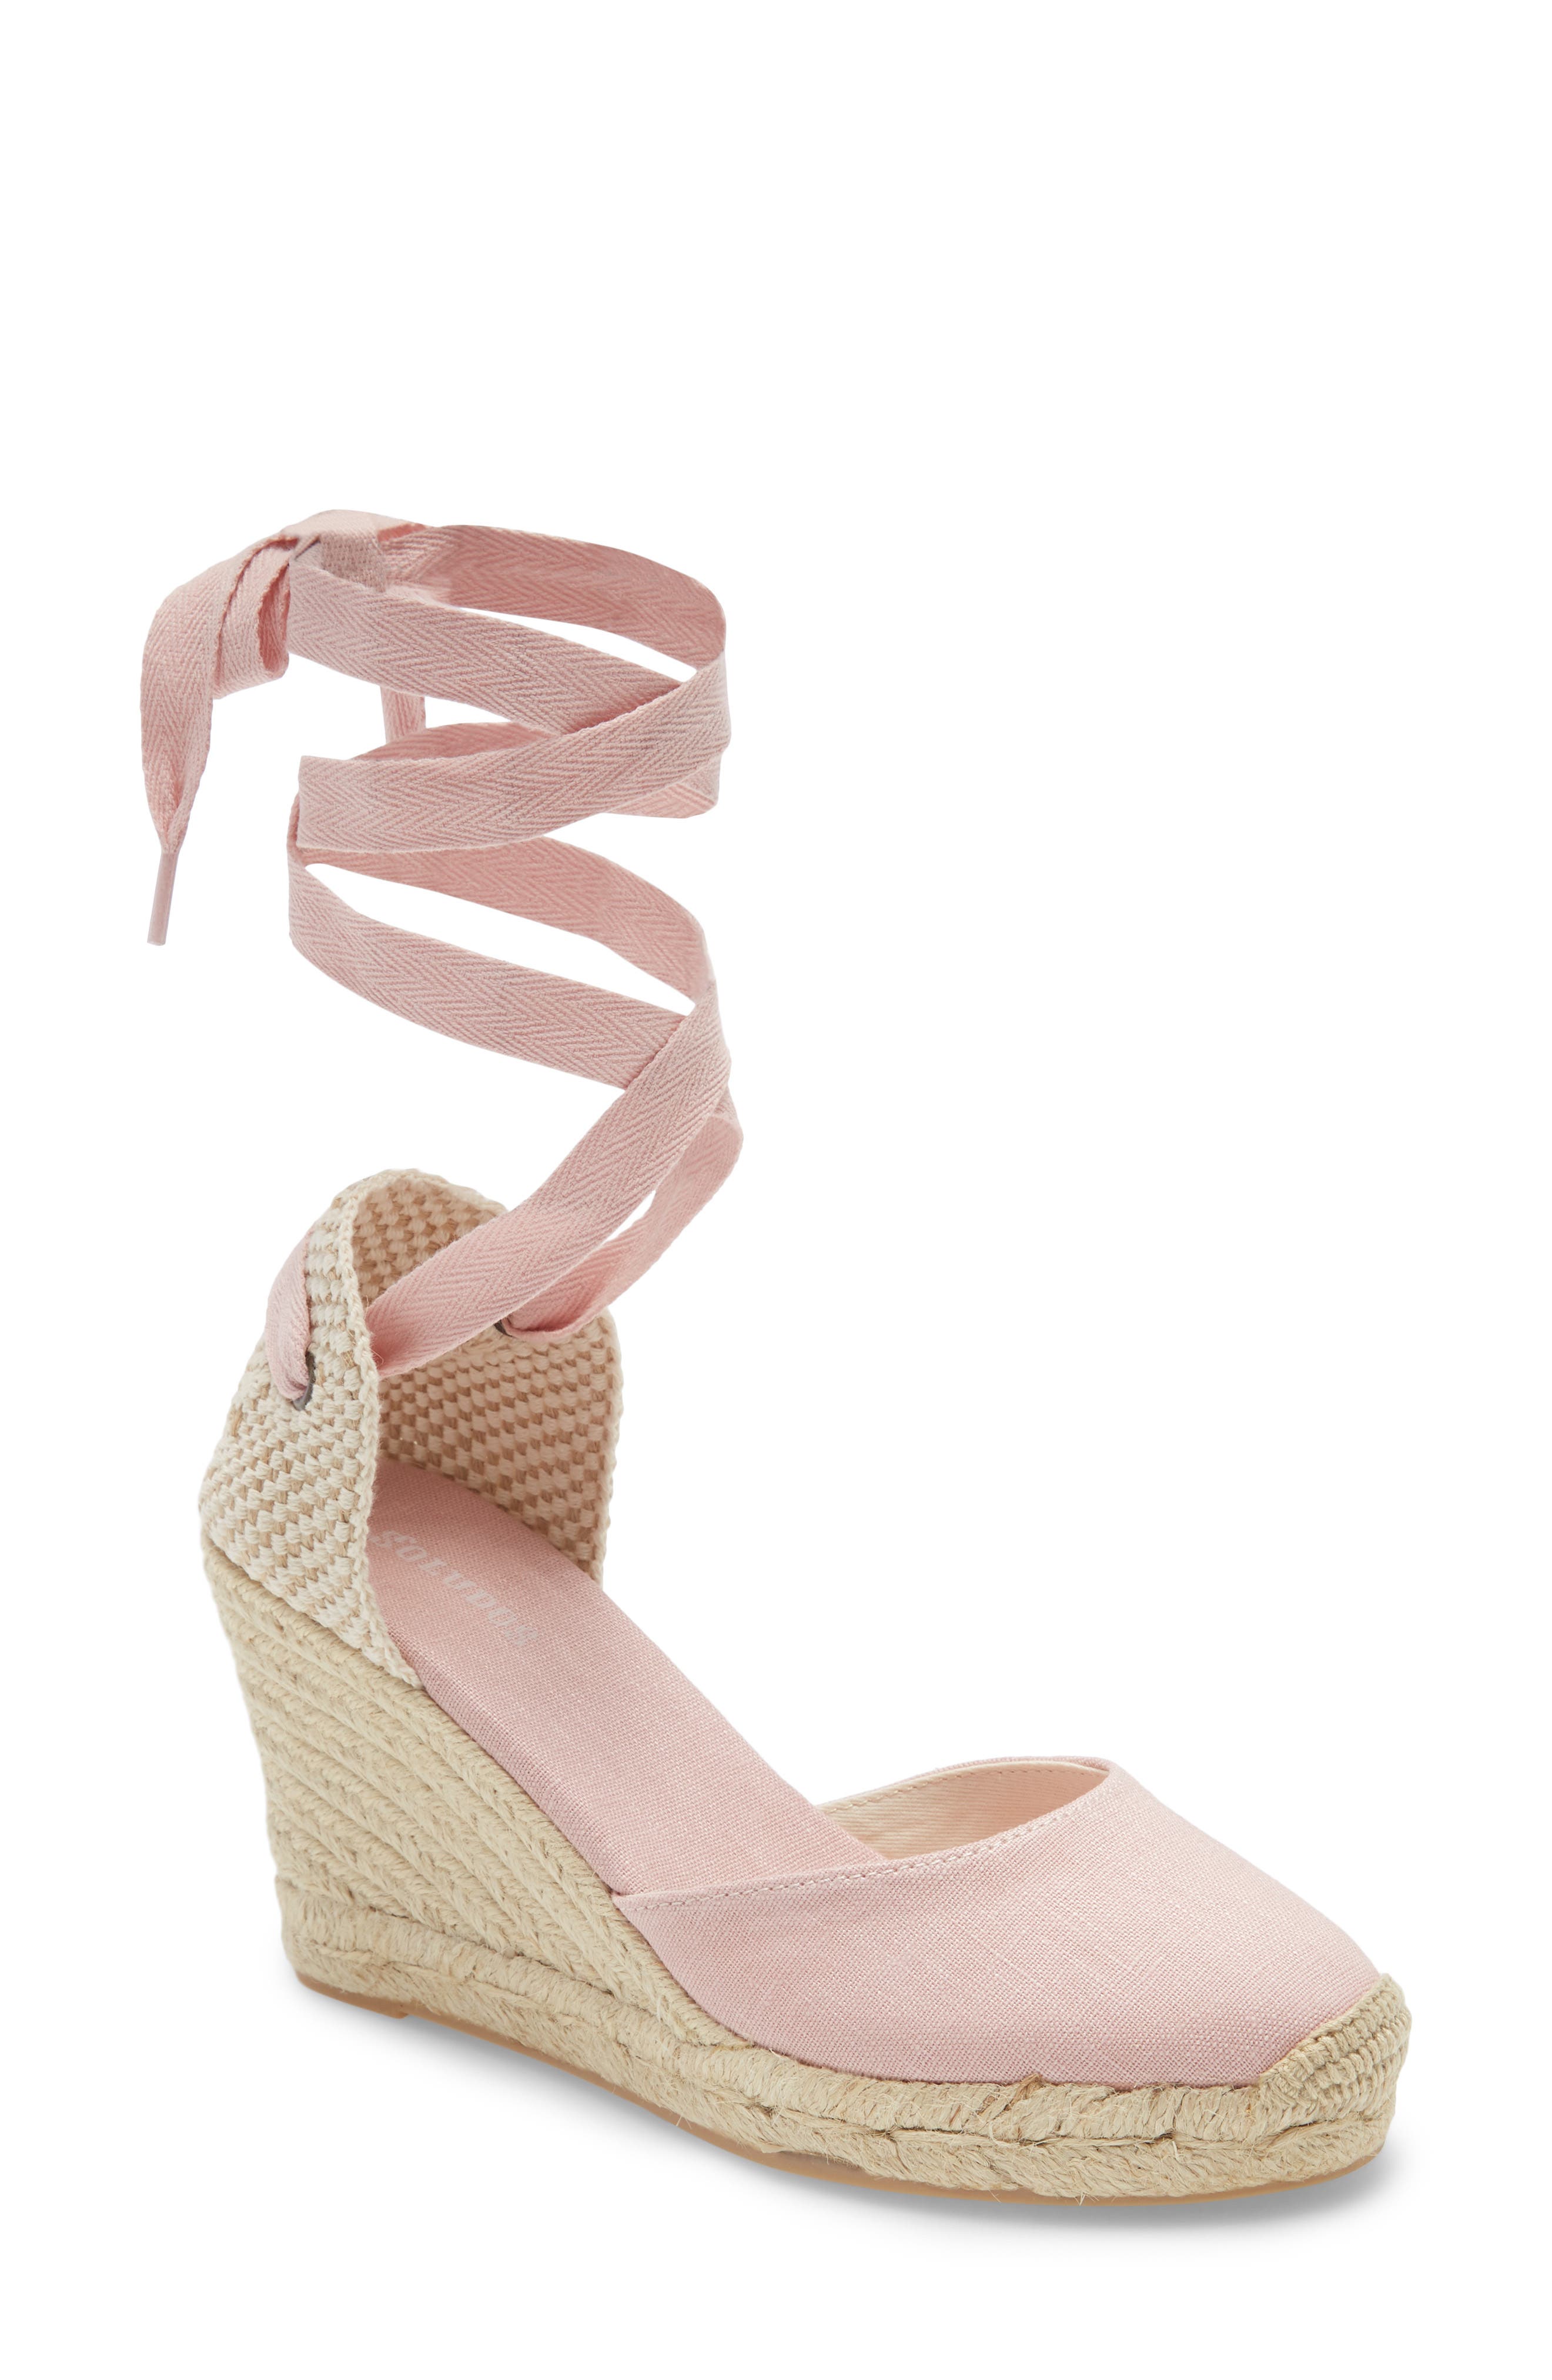 Ladies Wedge Heel Espadrille light pink with ankle strap sandals Size 8 